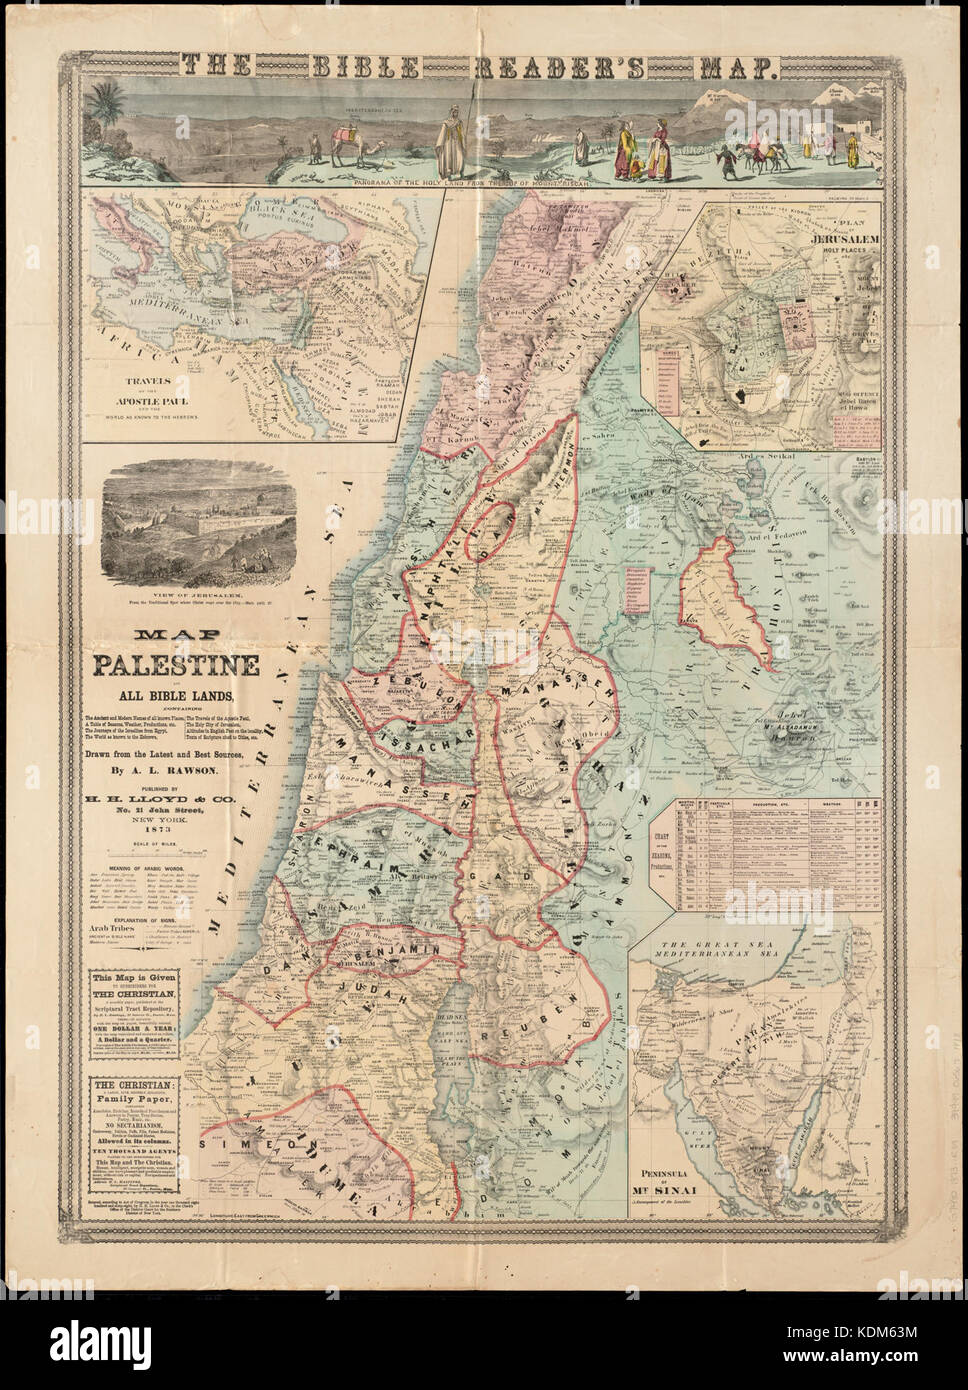 Map of Palestine and all Bible lands, containing the ancient and modern names of all known places, a table of seasons, weather, productions, etc., the journeys of the Israelites from Egypt, the world (10139457793) Stock Photo